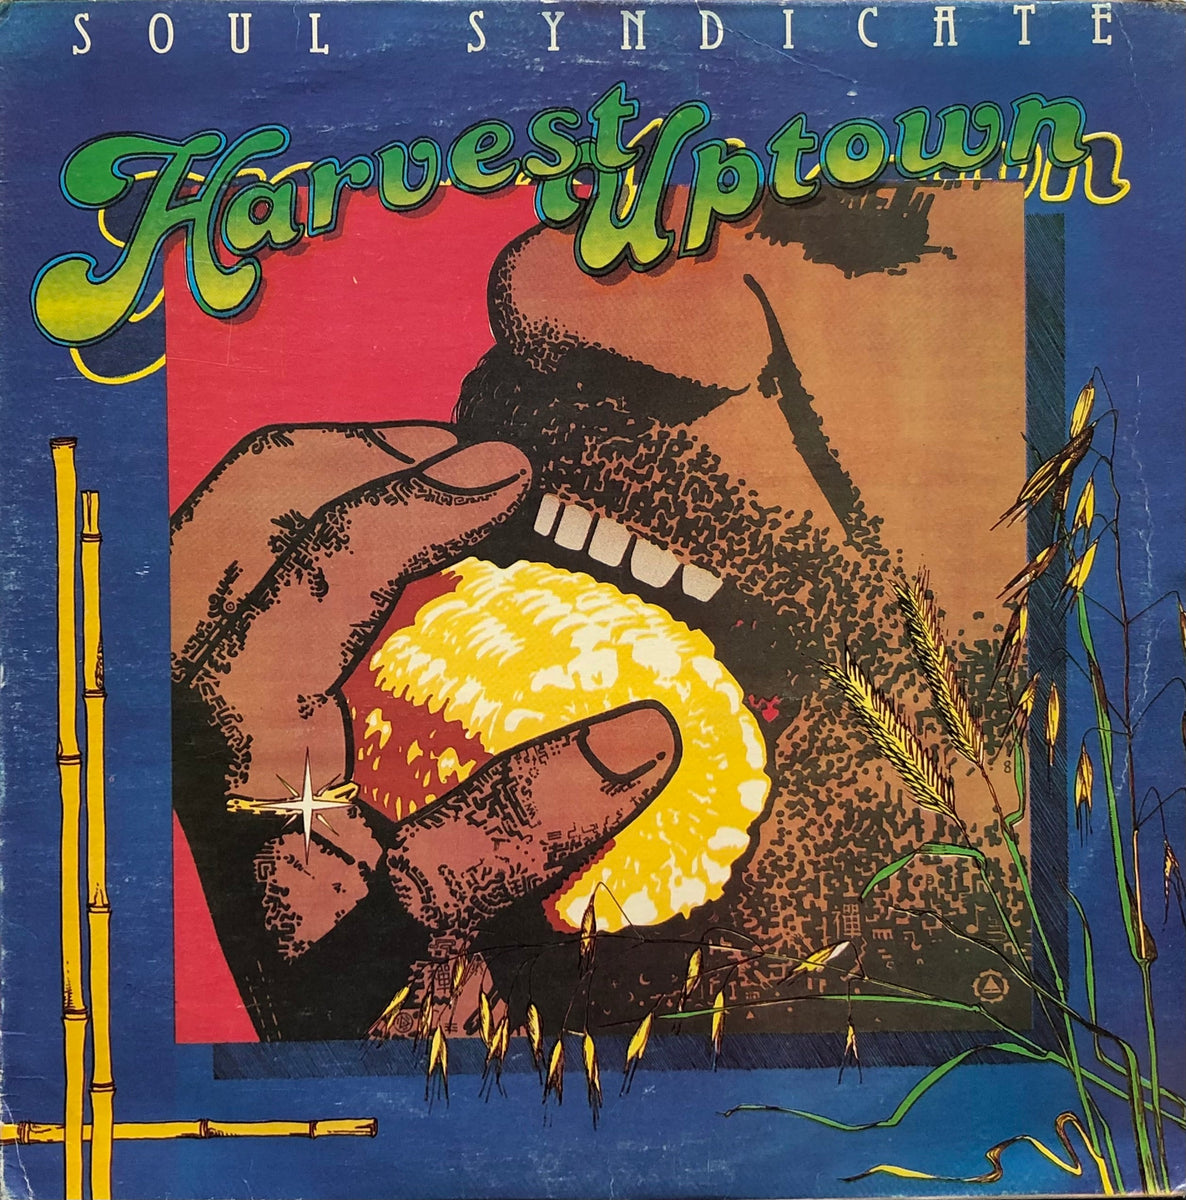 SOUL SYNDICATE / Harvest Uptown / Famine Downtown LP 